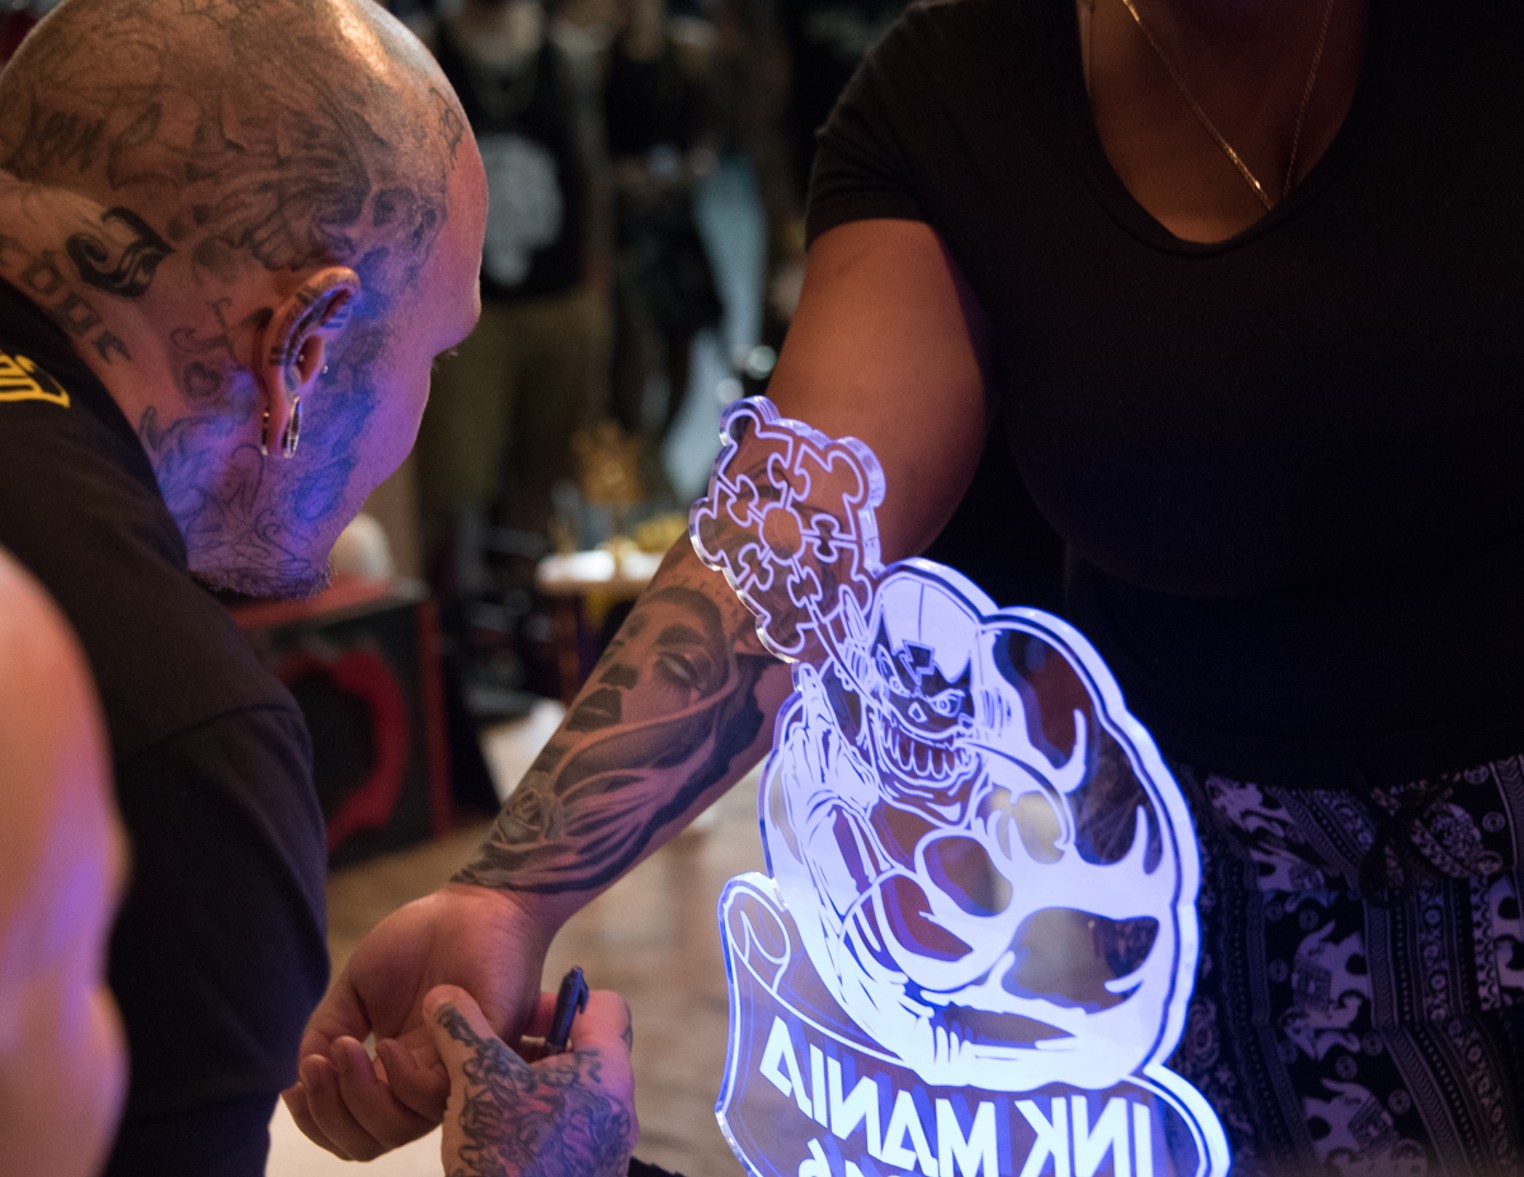 Tattoo artists ply trade at convention